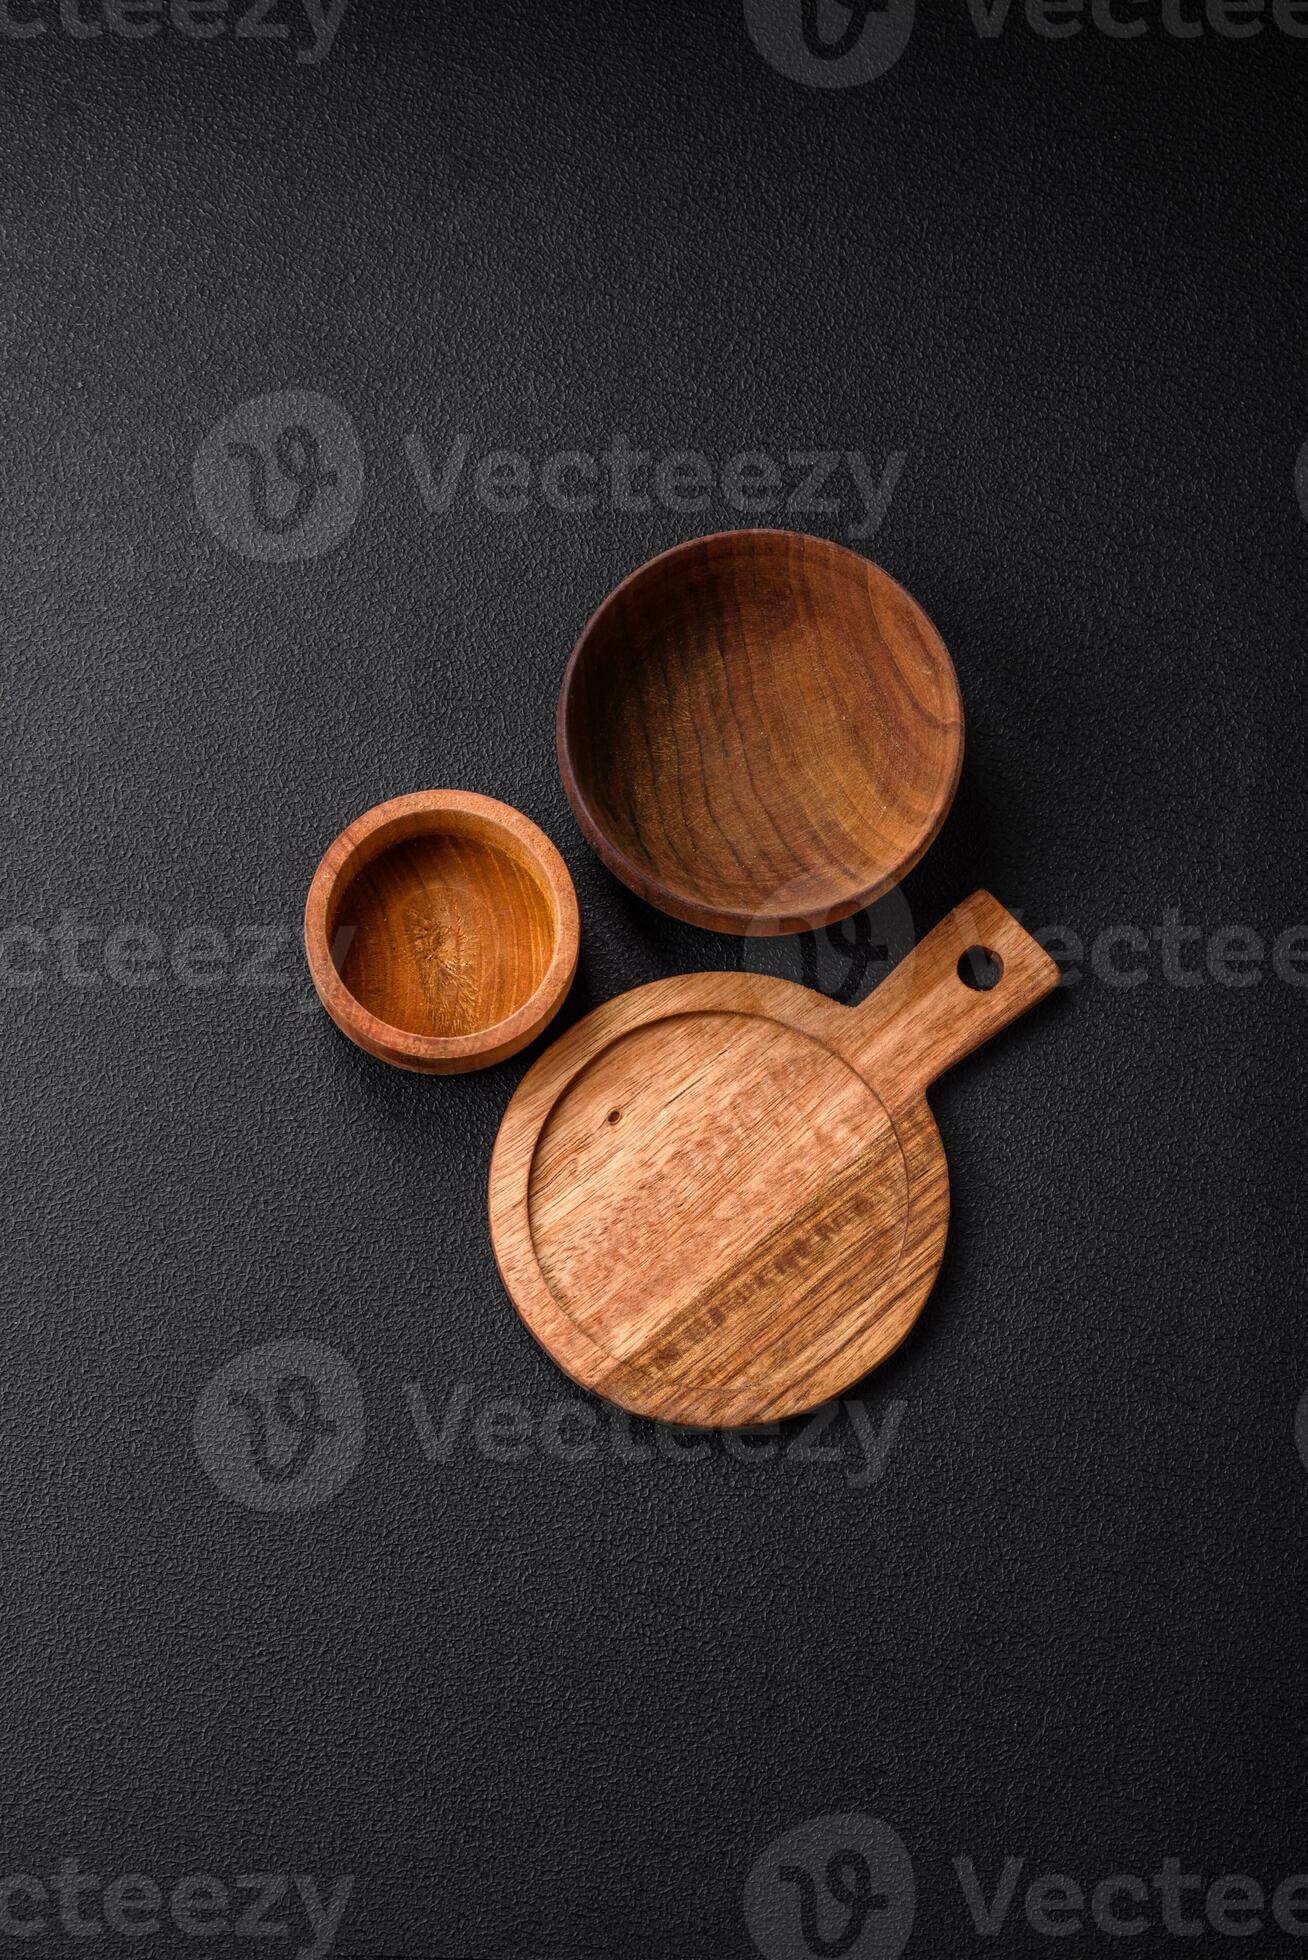 https://static.vecteezy.com/system/resources/previews/027/491/139/large_2x/empty-round-kitchen-wooden-cutting-board-in-brown-color-photo.jpg